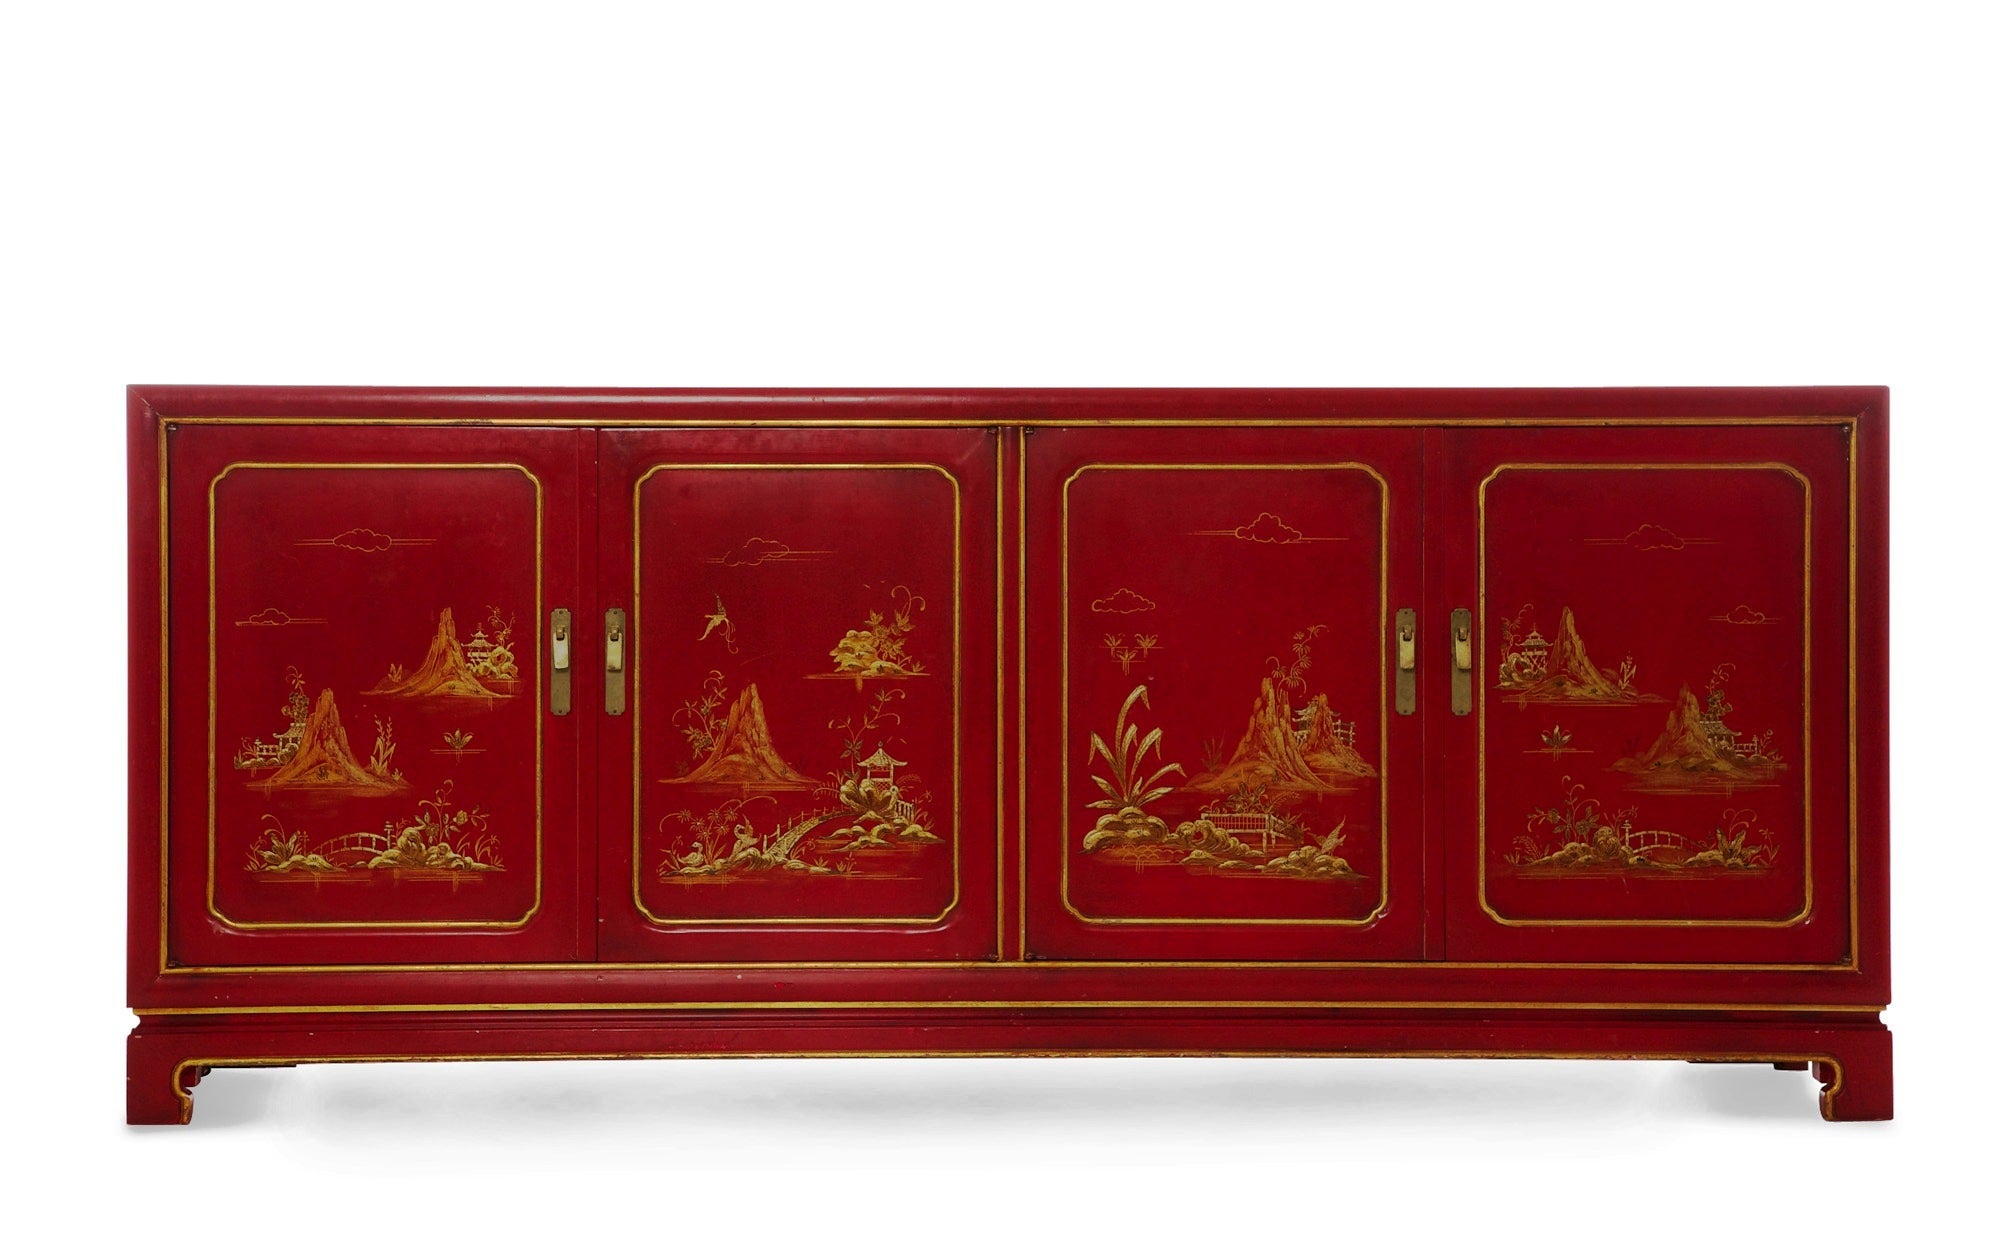 Red Lacquer Chinoiserie Credenza by John Widdicomb